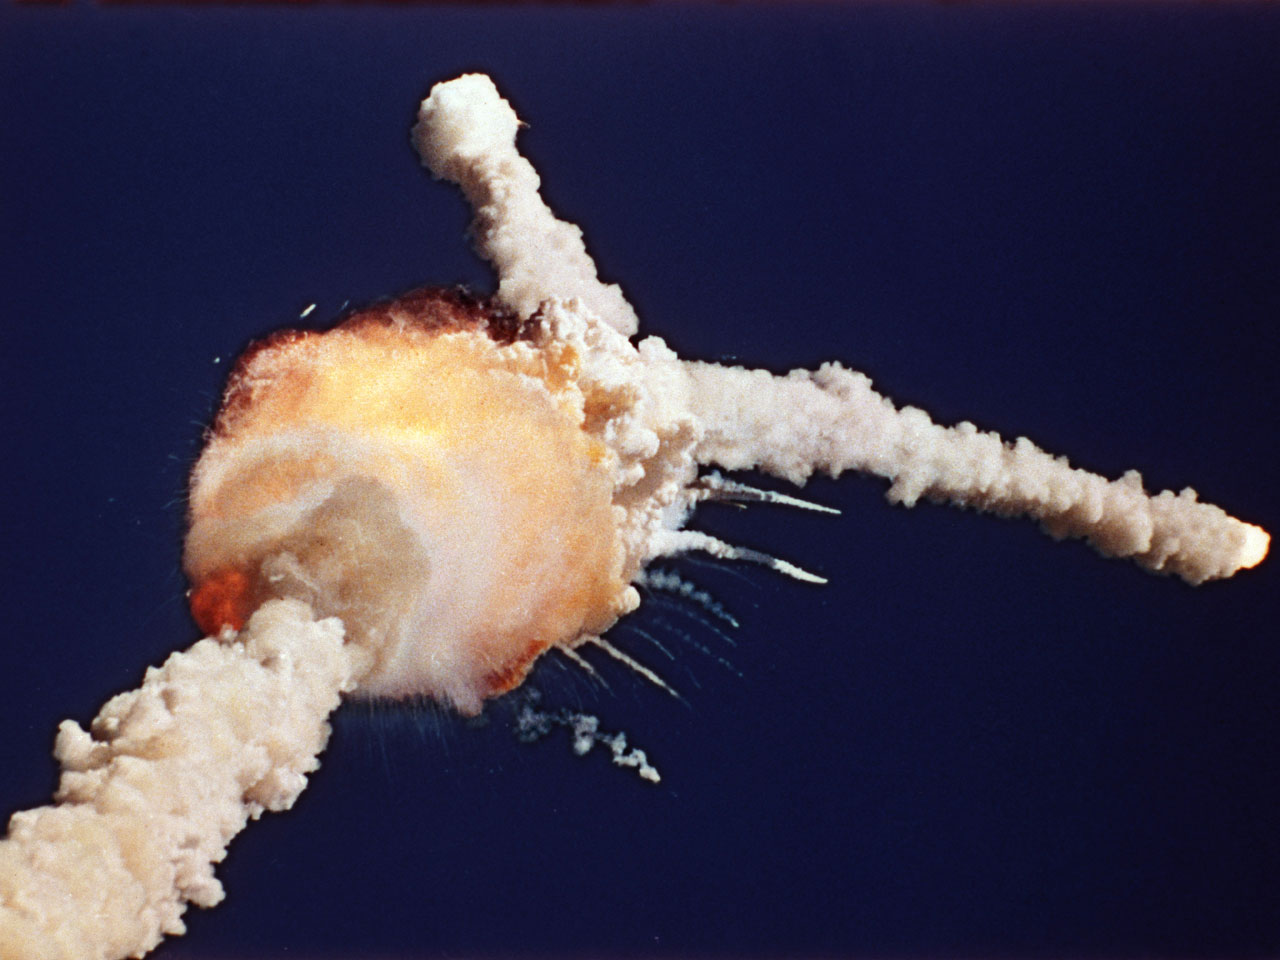 Challenger’s external tank, containing liquid hydrogen and liquid oxygen, exploded 1 minute 13 seconds after liftoff. The two solid rocket boosters flew off in different directions. (Bruce Weaver/AP)